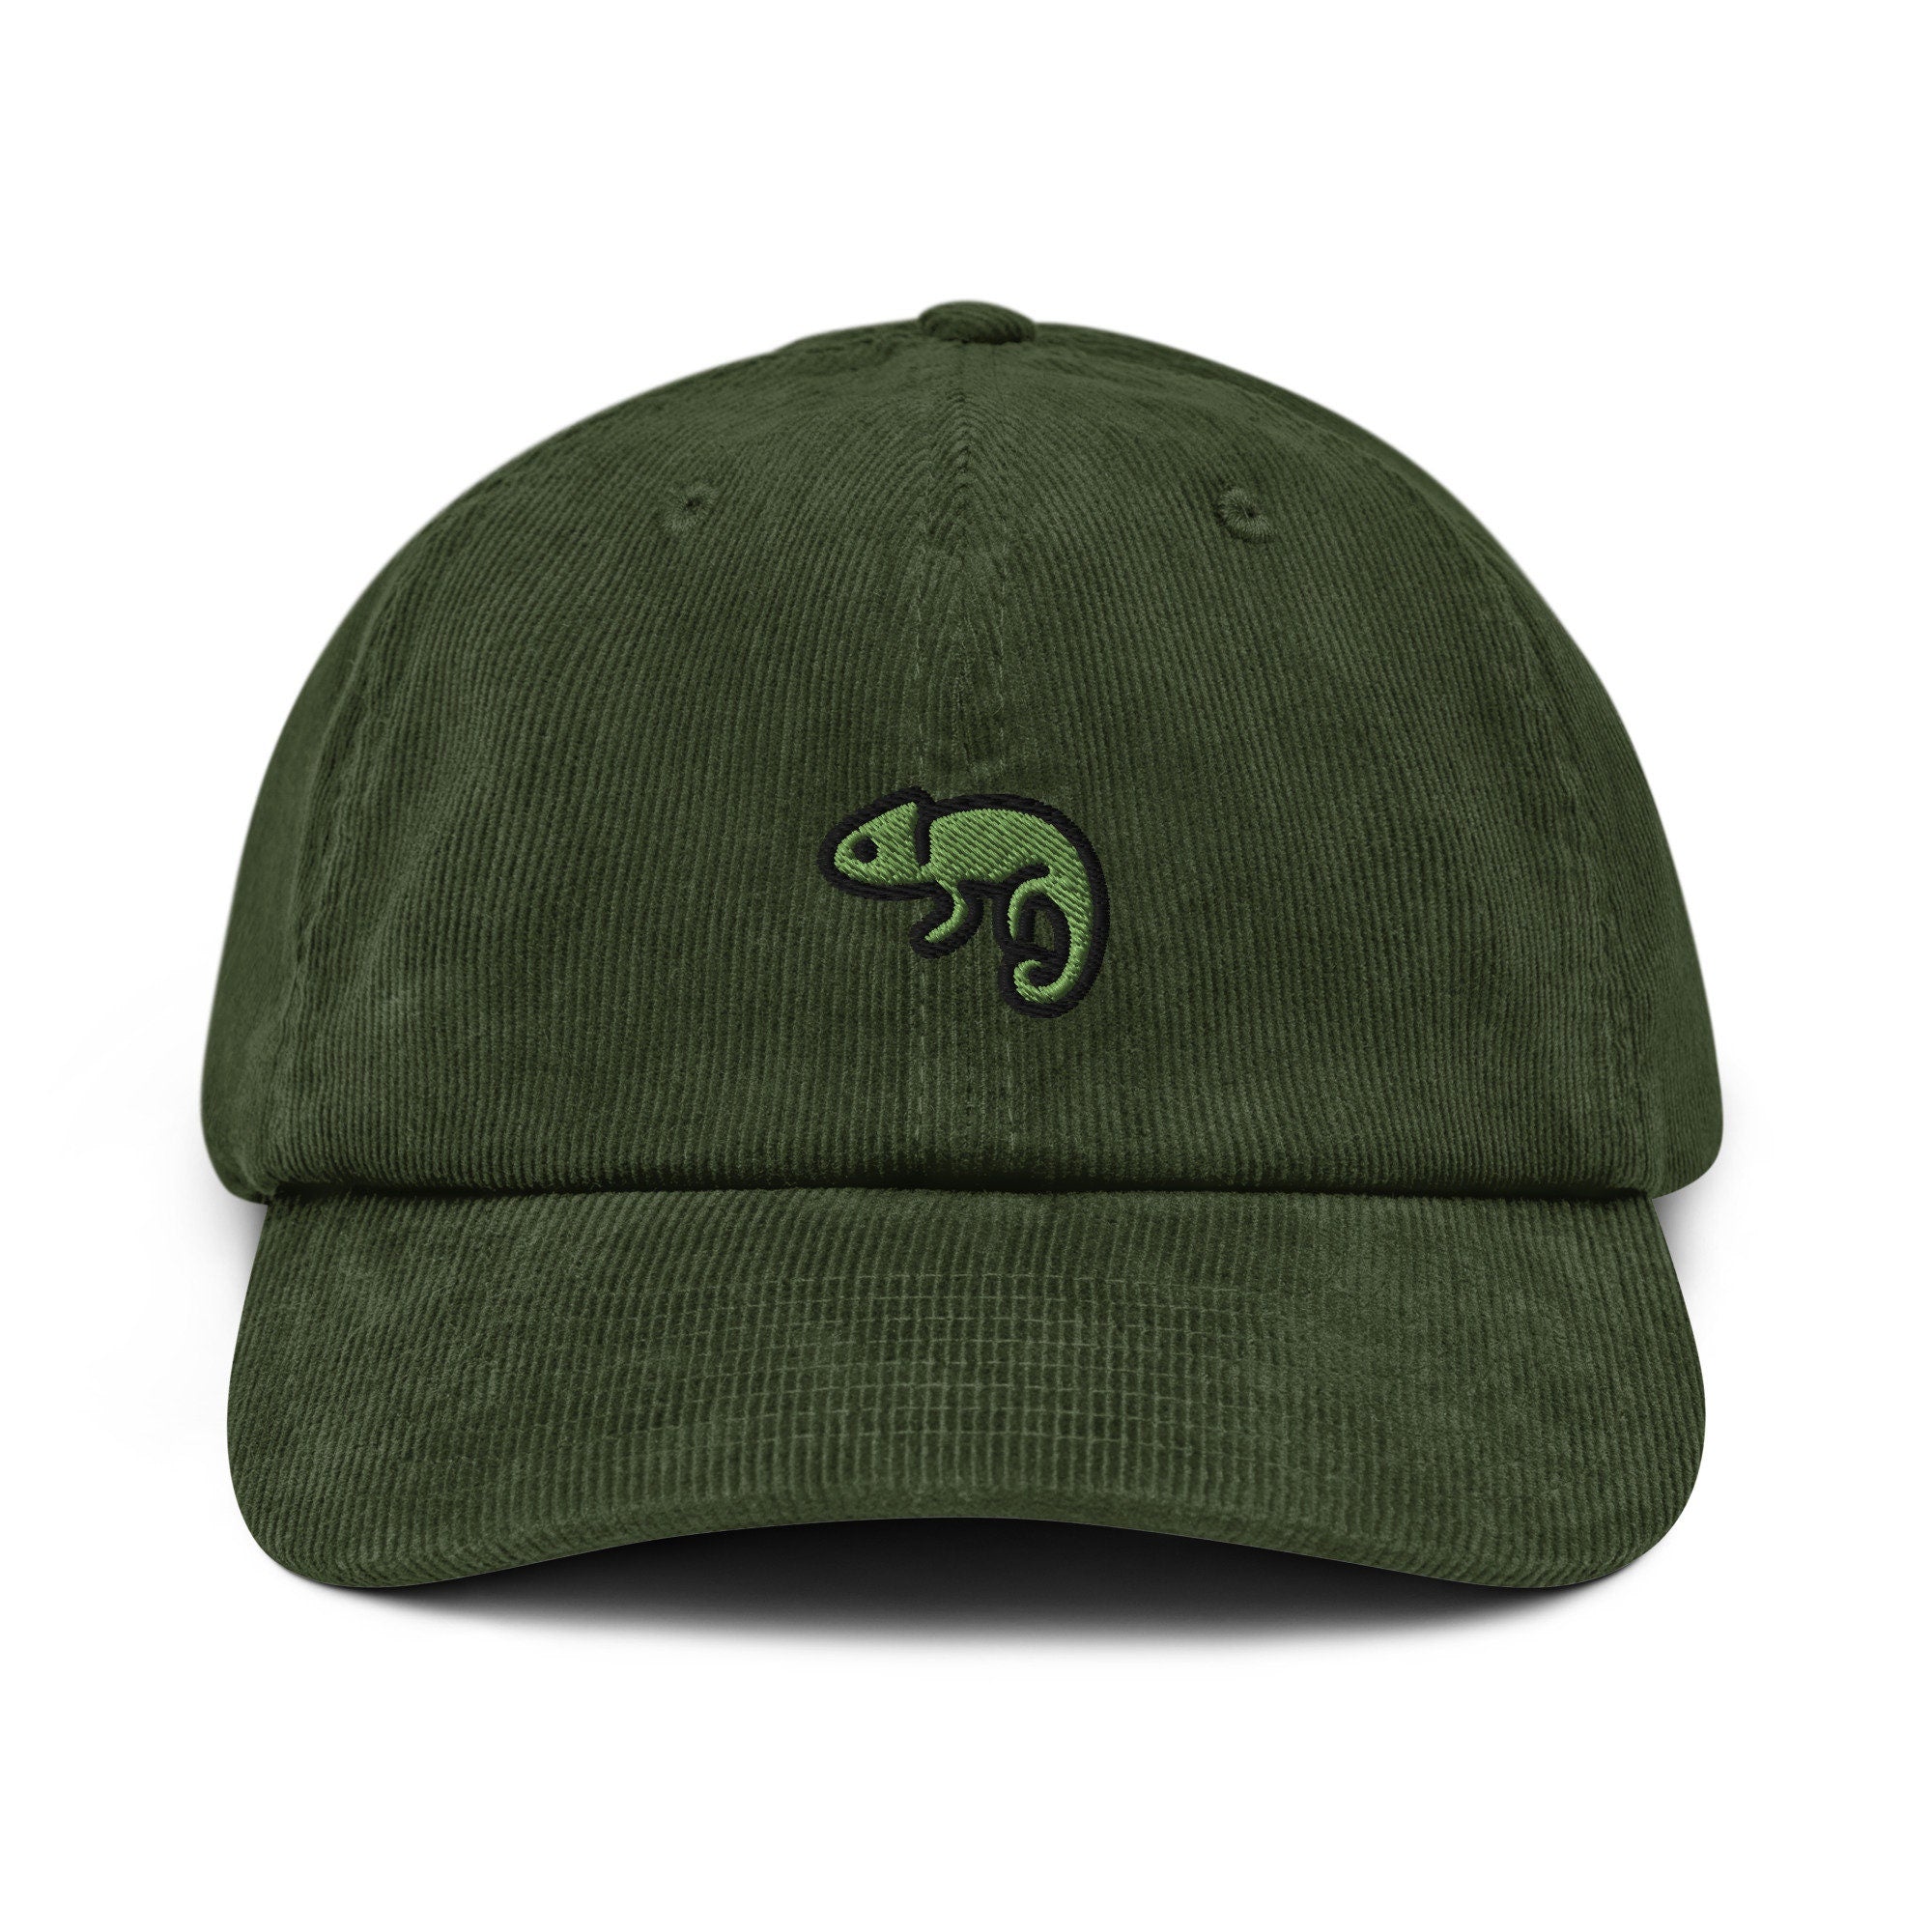 Camelion Embroidered Corduroy Hat, Handmade Lizard Cap Embroidery, Green Chameleon Embroidered Cap - Multiple Colors